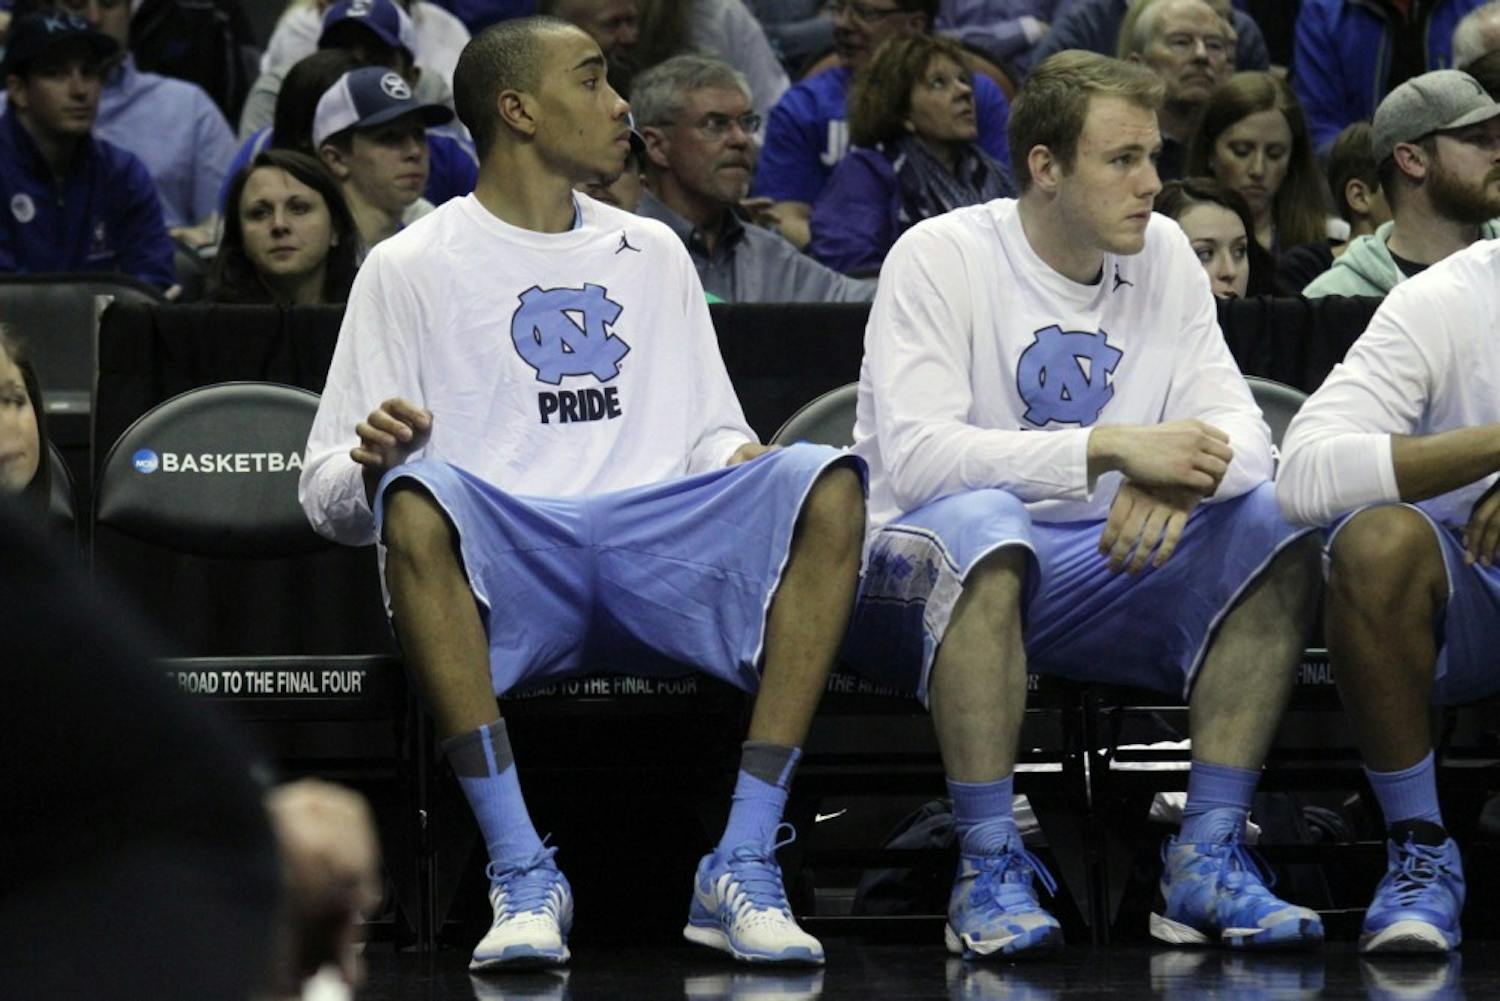 Brice Johnson watched most of the game from the bench after an injury sent him out of the game in the first half. The UNC men's basketball team lost to Iowa State 85-83 in the third round of the NCAA tournament.  